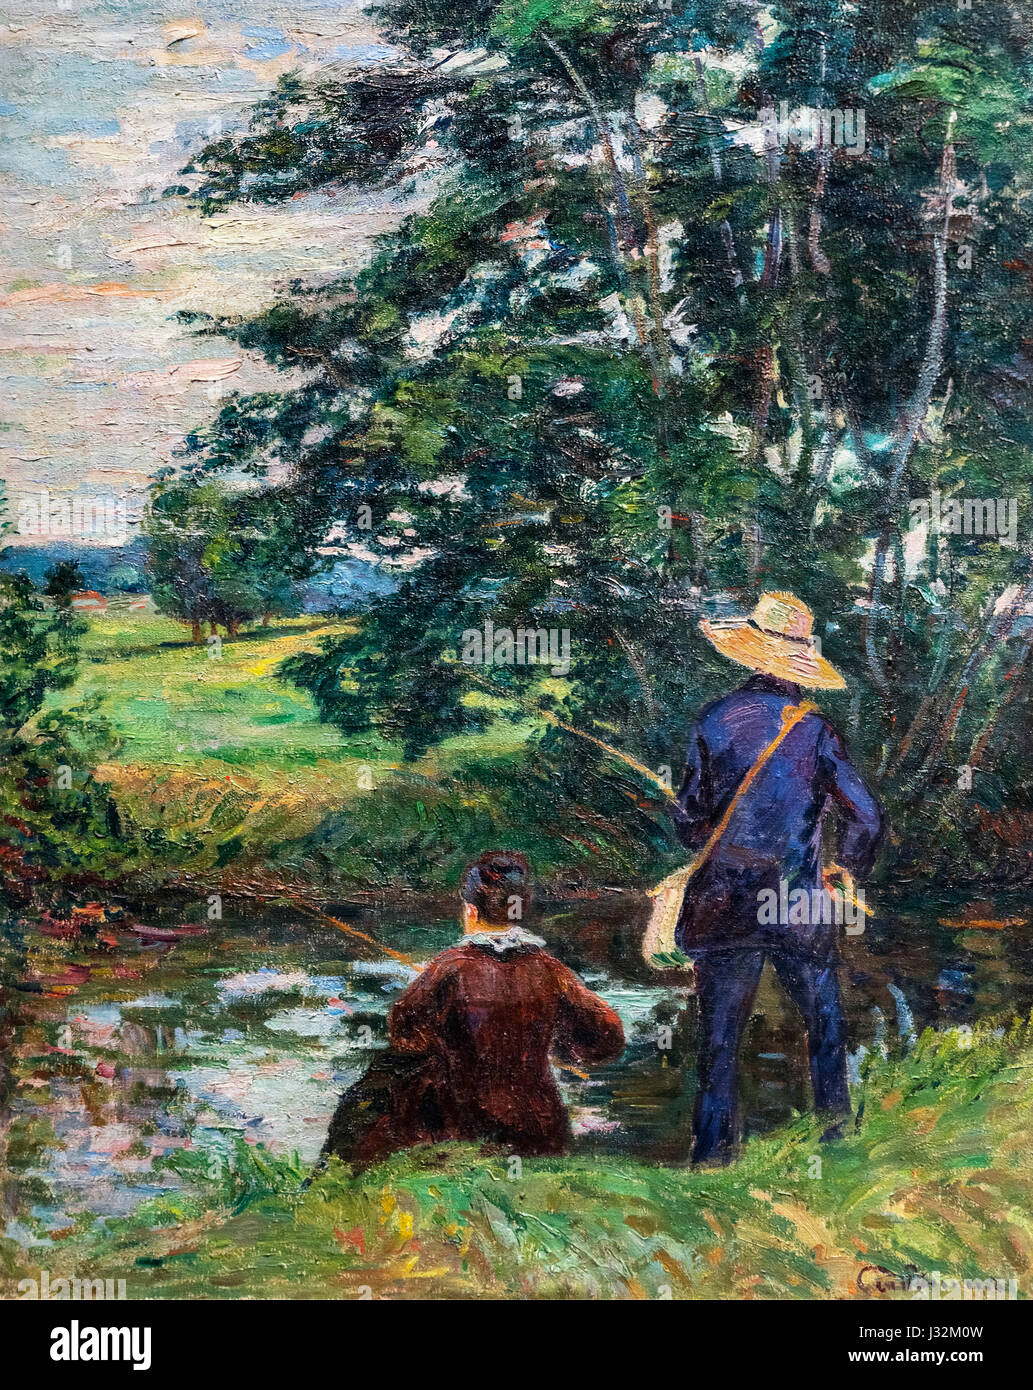 Armand Guillaumin (1841-1927) "Les Pecheurs" (The Fishers), oil on canvas, c.1885. Stock Photo